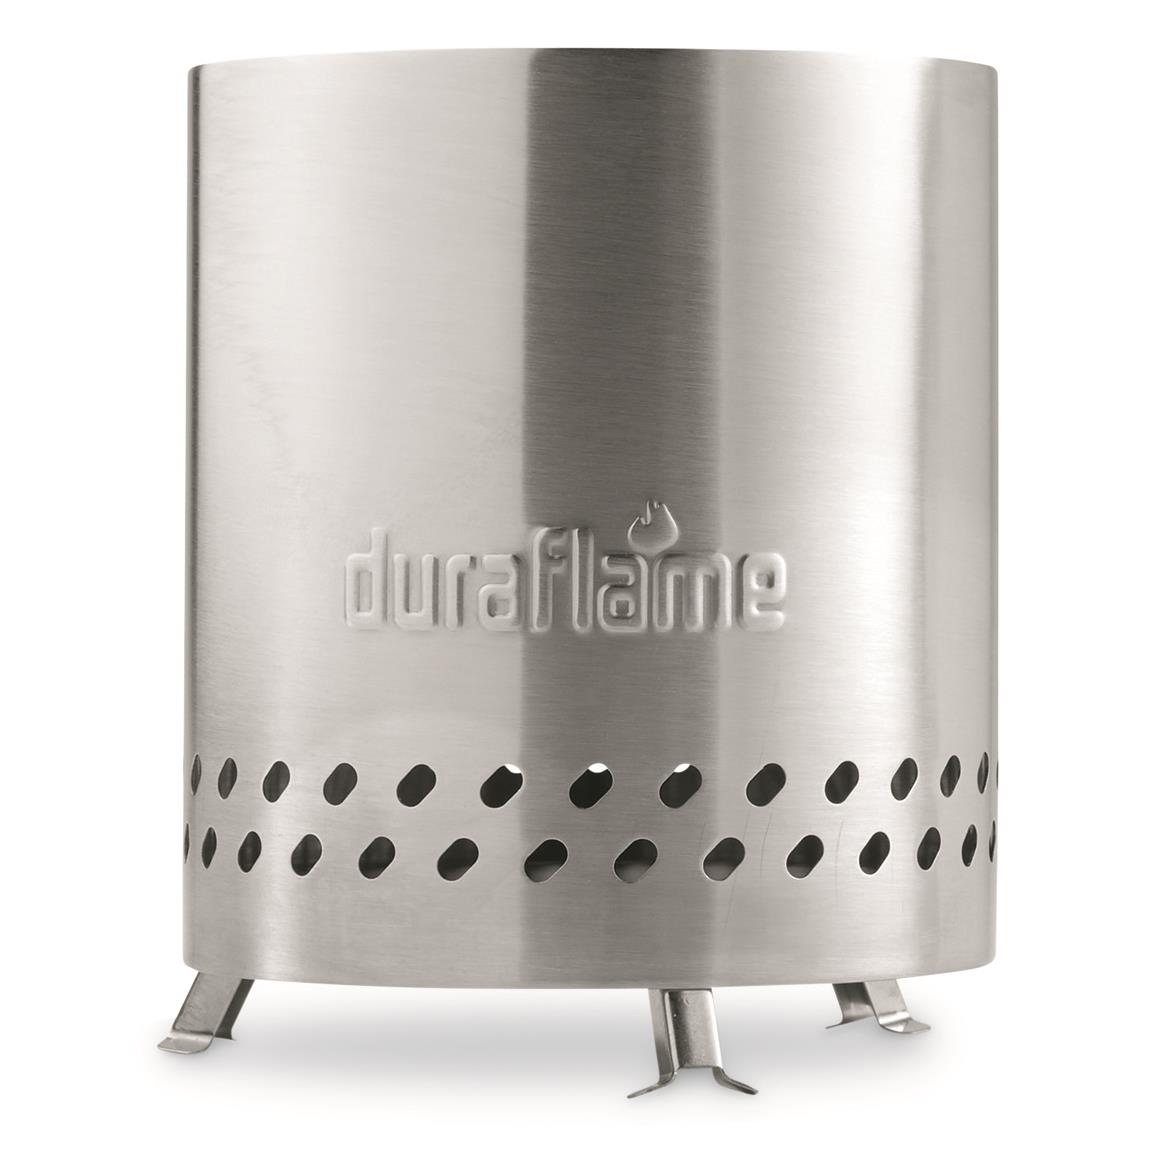 Duraflame 5.5" Mini Low Smoke Stainless Steel Fire Pit